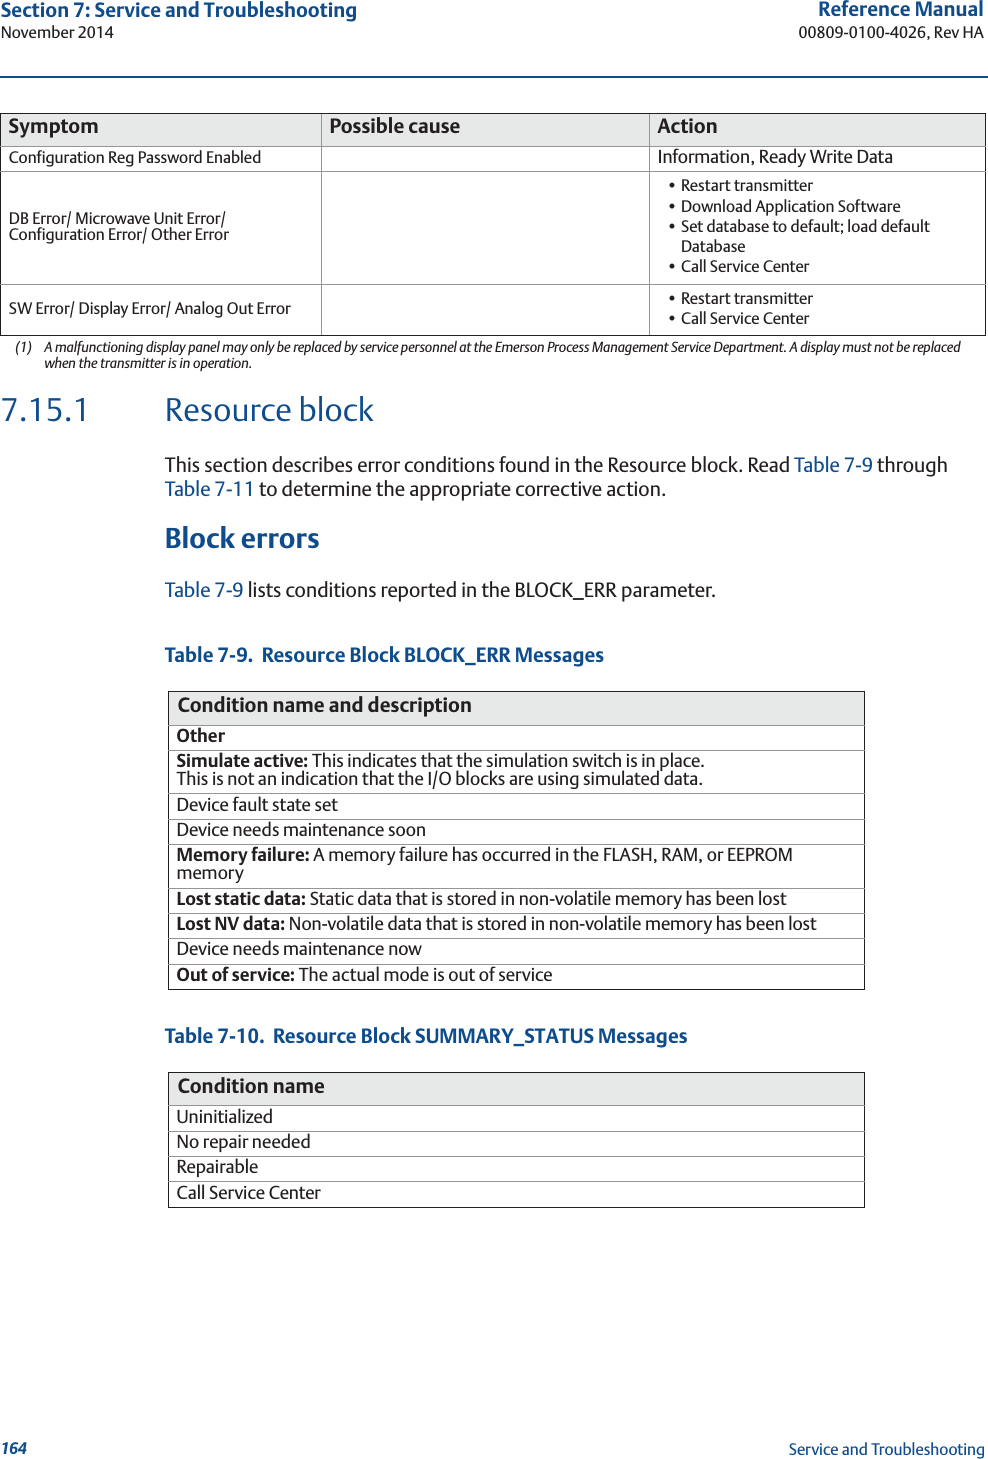 164Reference Manual00809-0100-4026, Rev HASection 7: Service and TroubleshootingNovember 2014Service and Troubleshooting7.15.1 Resource blockThis section describes error conditions found in the Resource block. Read Table 7-9 through Table 7-11 to determine the appropriate corrective action.Block errorsTable 7-9 lists conditions reported in the BLOCK_ERR parameter. Table 7-9.  Resource Block BLOCK_ERR MessagesTable 7-10.  Resource Block SUMMARY_STATUS MessagesConfiguration Reg Password Enabled Information, Ready Write DataDB Error/ Microwave Unit Error/ Configuration Error/ Other Error• Restart transmitter• Download Application Software• Set database to default; load default Database •Call Service CenterSW Error/ Display Error/ Analog Out Error • Restart transmitter•Call Service Center(1) A malfunctioning display panel may only be replaced by service personnel at the Emerson Process Management Service Department. A display must not be replaced when the transmitter is in operation.Condition name and descriptionOtherSimulate active: This indicates that the simulation switch is in place. This is not an indication that the I/O blocks are using simulated data.Device fault state setDevice needs maintenance soonMemory failure: A memory failure has occurred in the FLASH, RAM, or EEPROM memoryLost static data: Static data that is stored in non-volatile memory has been lostLost NV data: Non-volatile data that is stored in non-volatile memory has been lostDevice needs maintenance nowOut of service: The actual mode is out of serviceCondition nameUninitializedNo repair neededRepairableCall Service CenterSymptom Possible cause Action